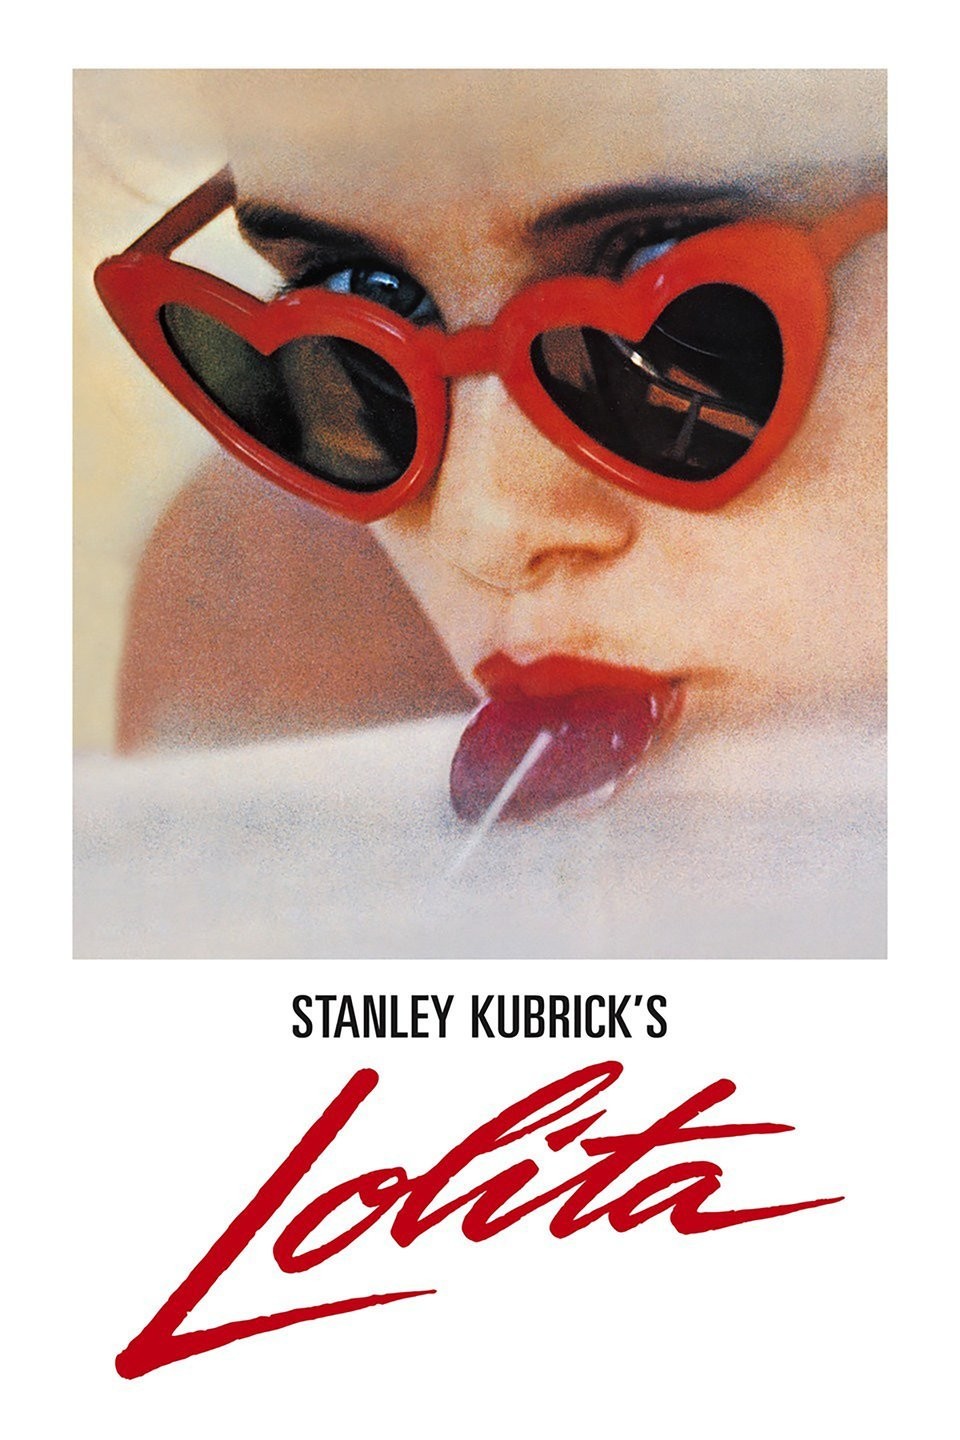 How to watch and stream Lolita - 1997 on Roku